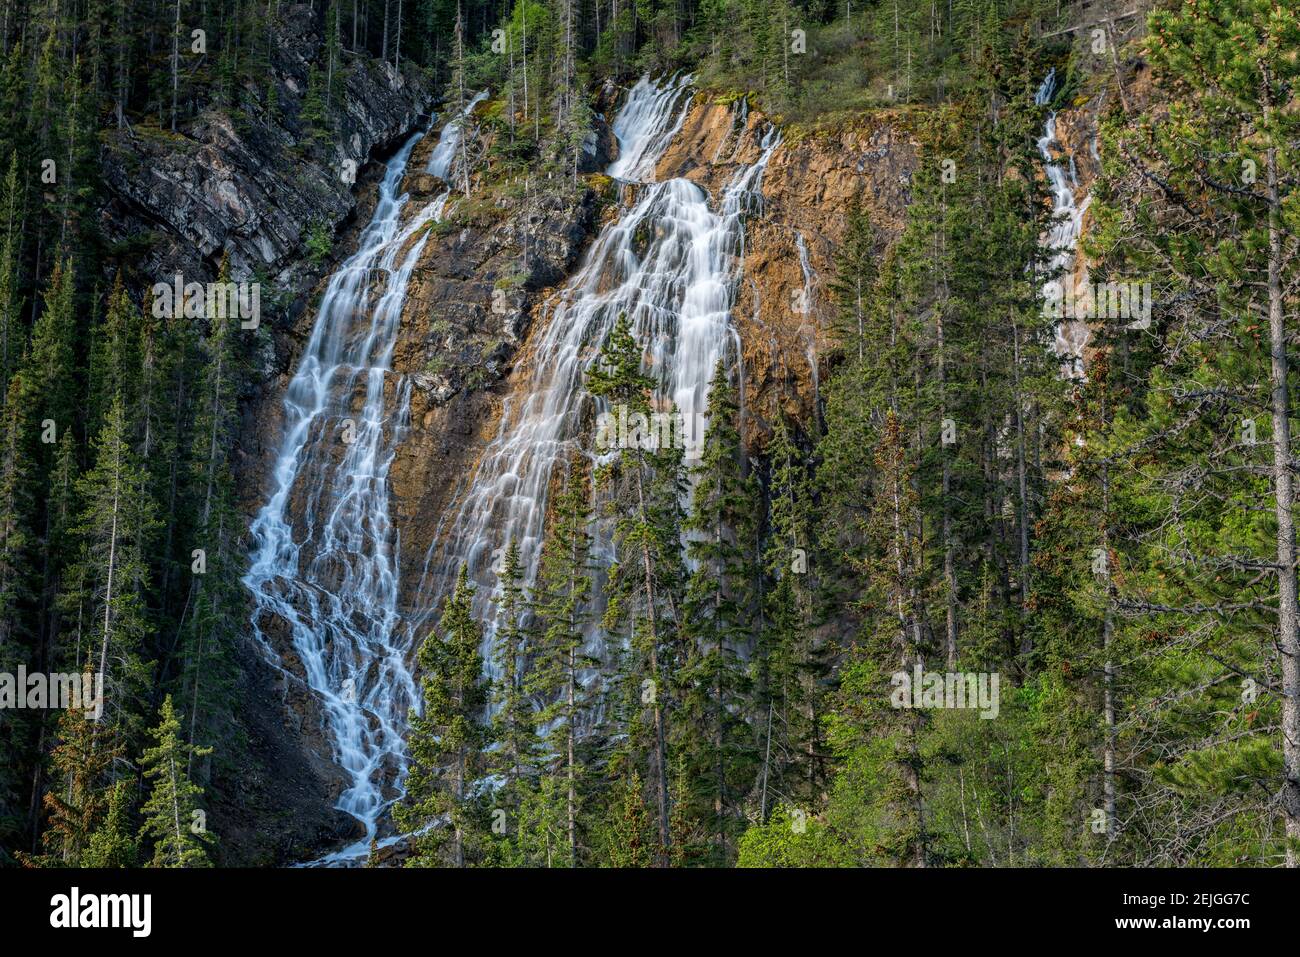 Waterfall in forest, Grassi Falls, Canmore, Alberta, Canada Stock Photo